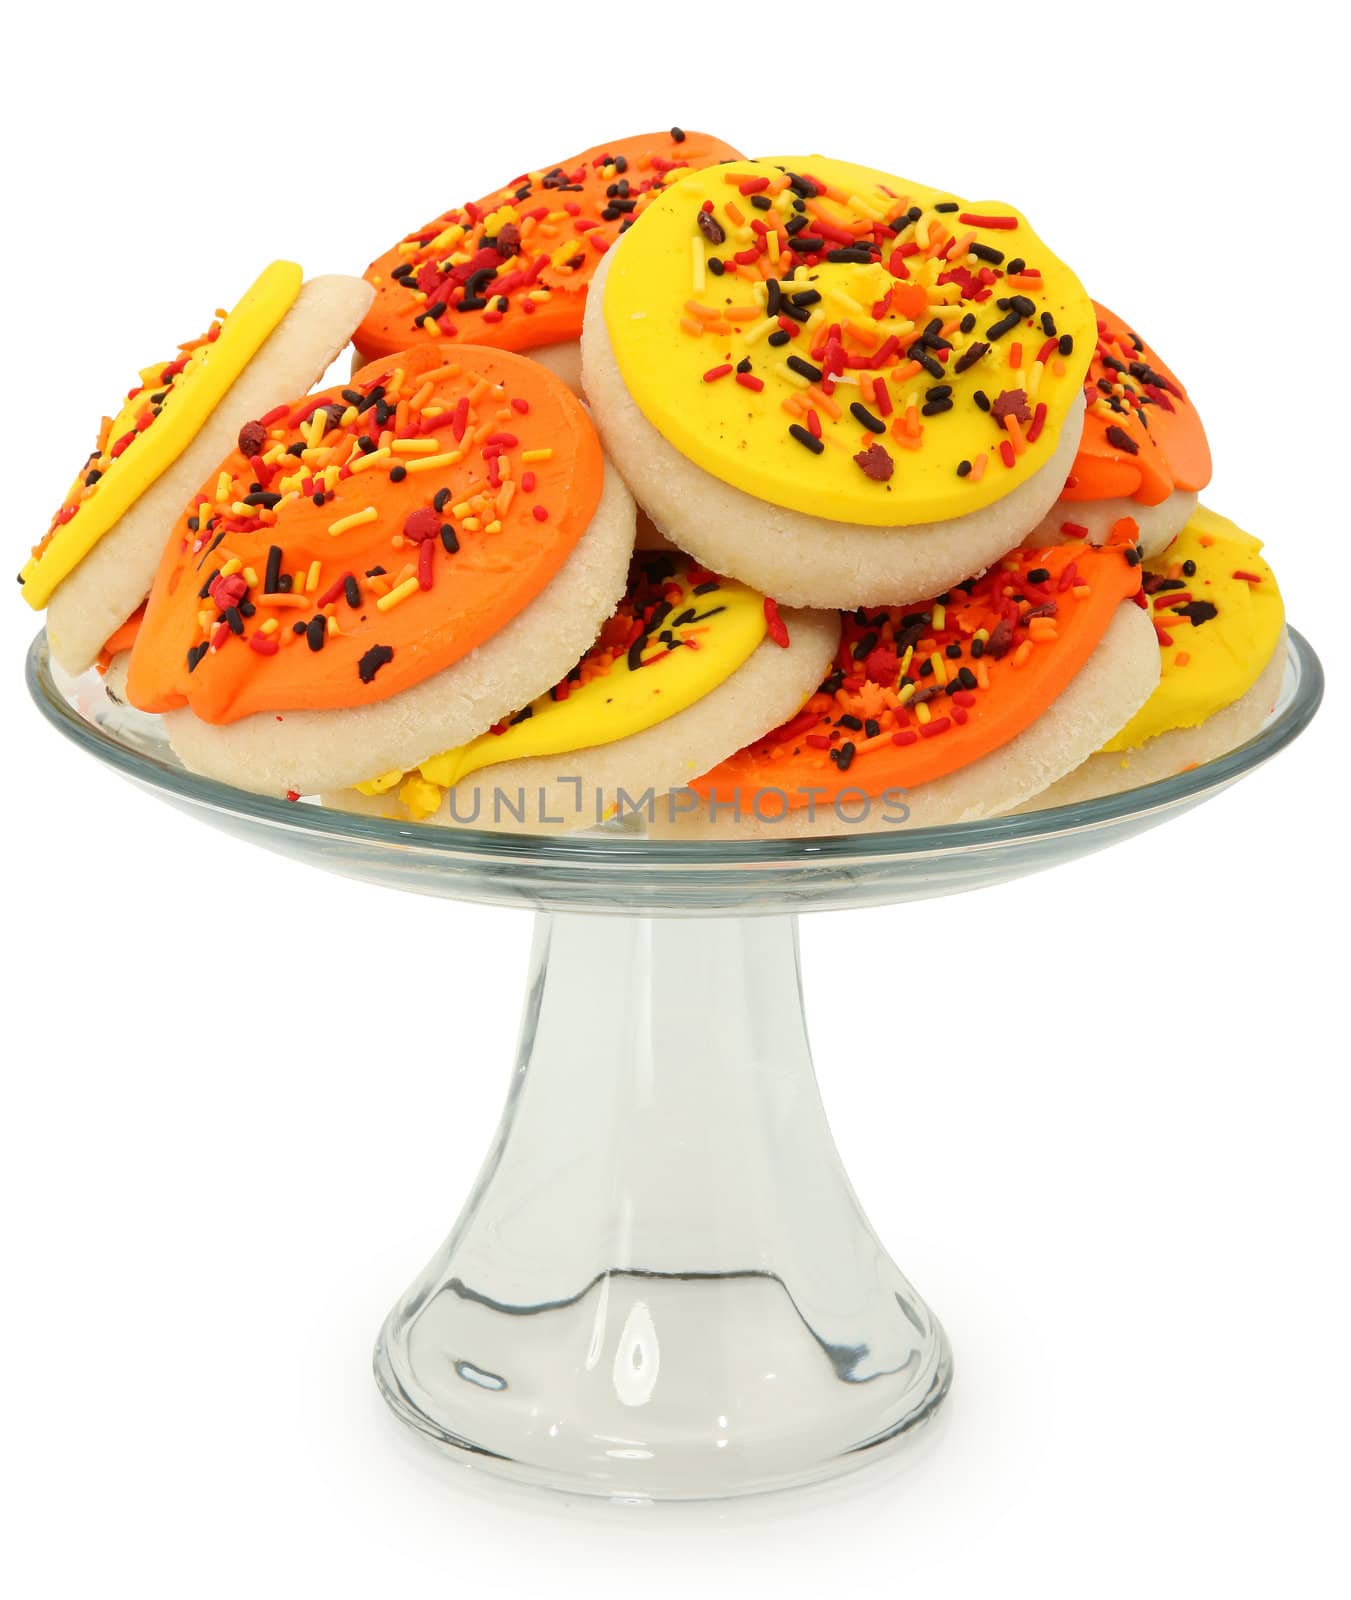 Orange and yellow autum decorated sugar cookies on glass platter over white.